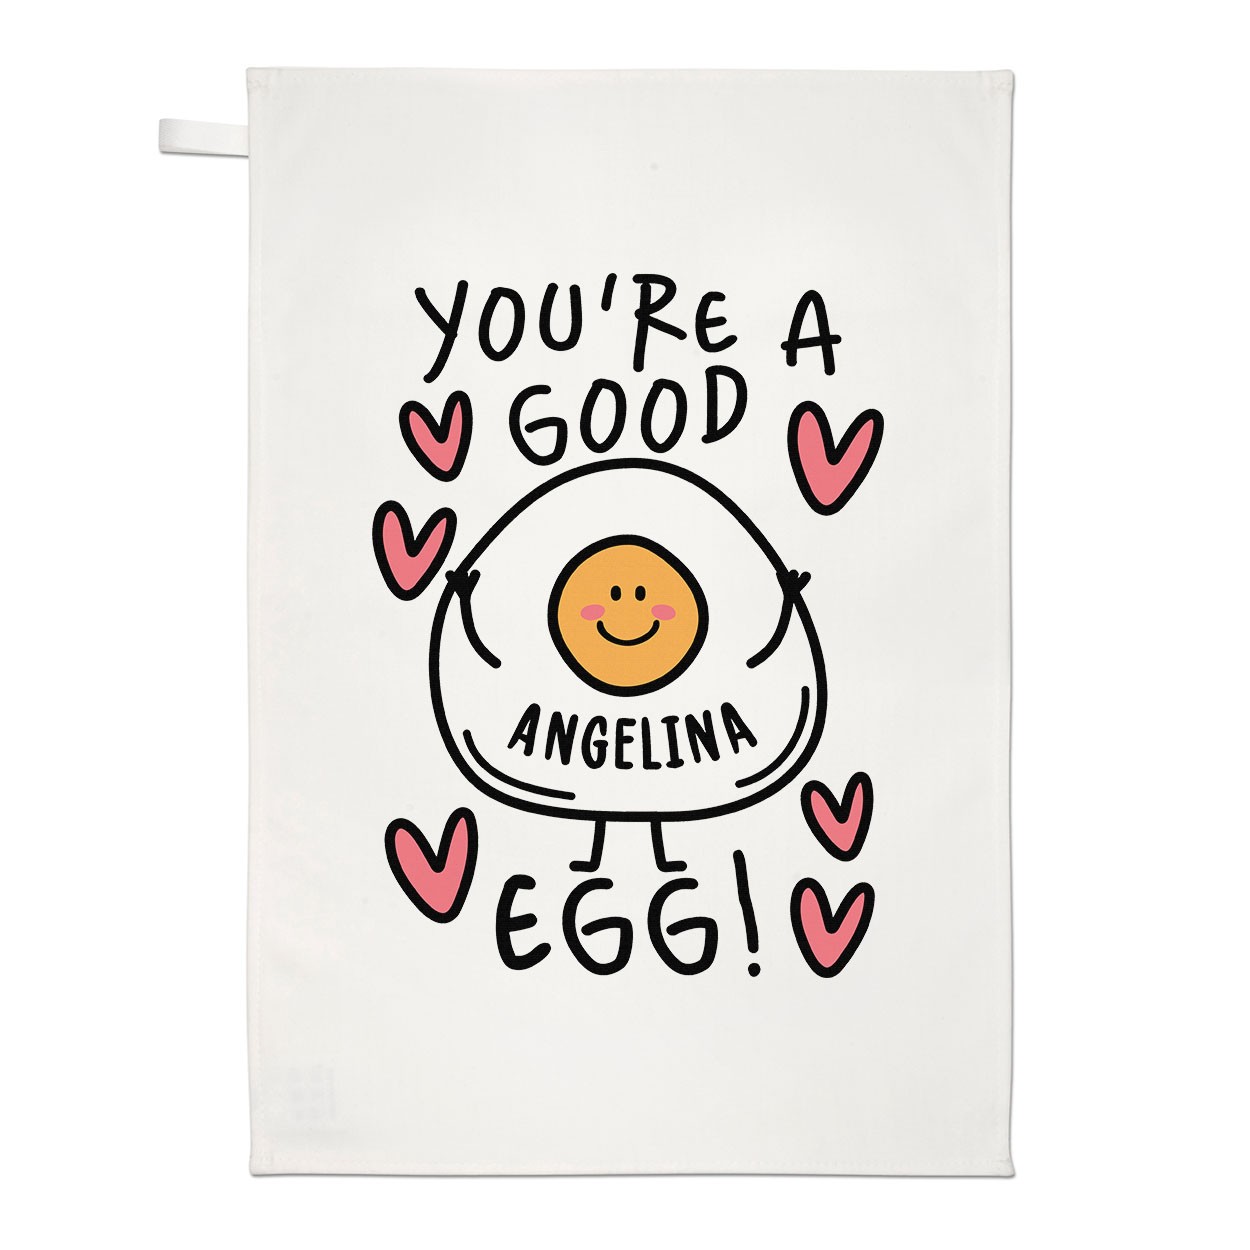 Personalised You're A Good Egg Tea Towel Dish Cloth